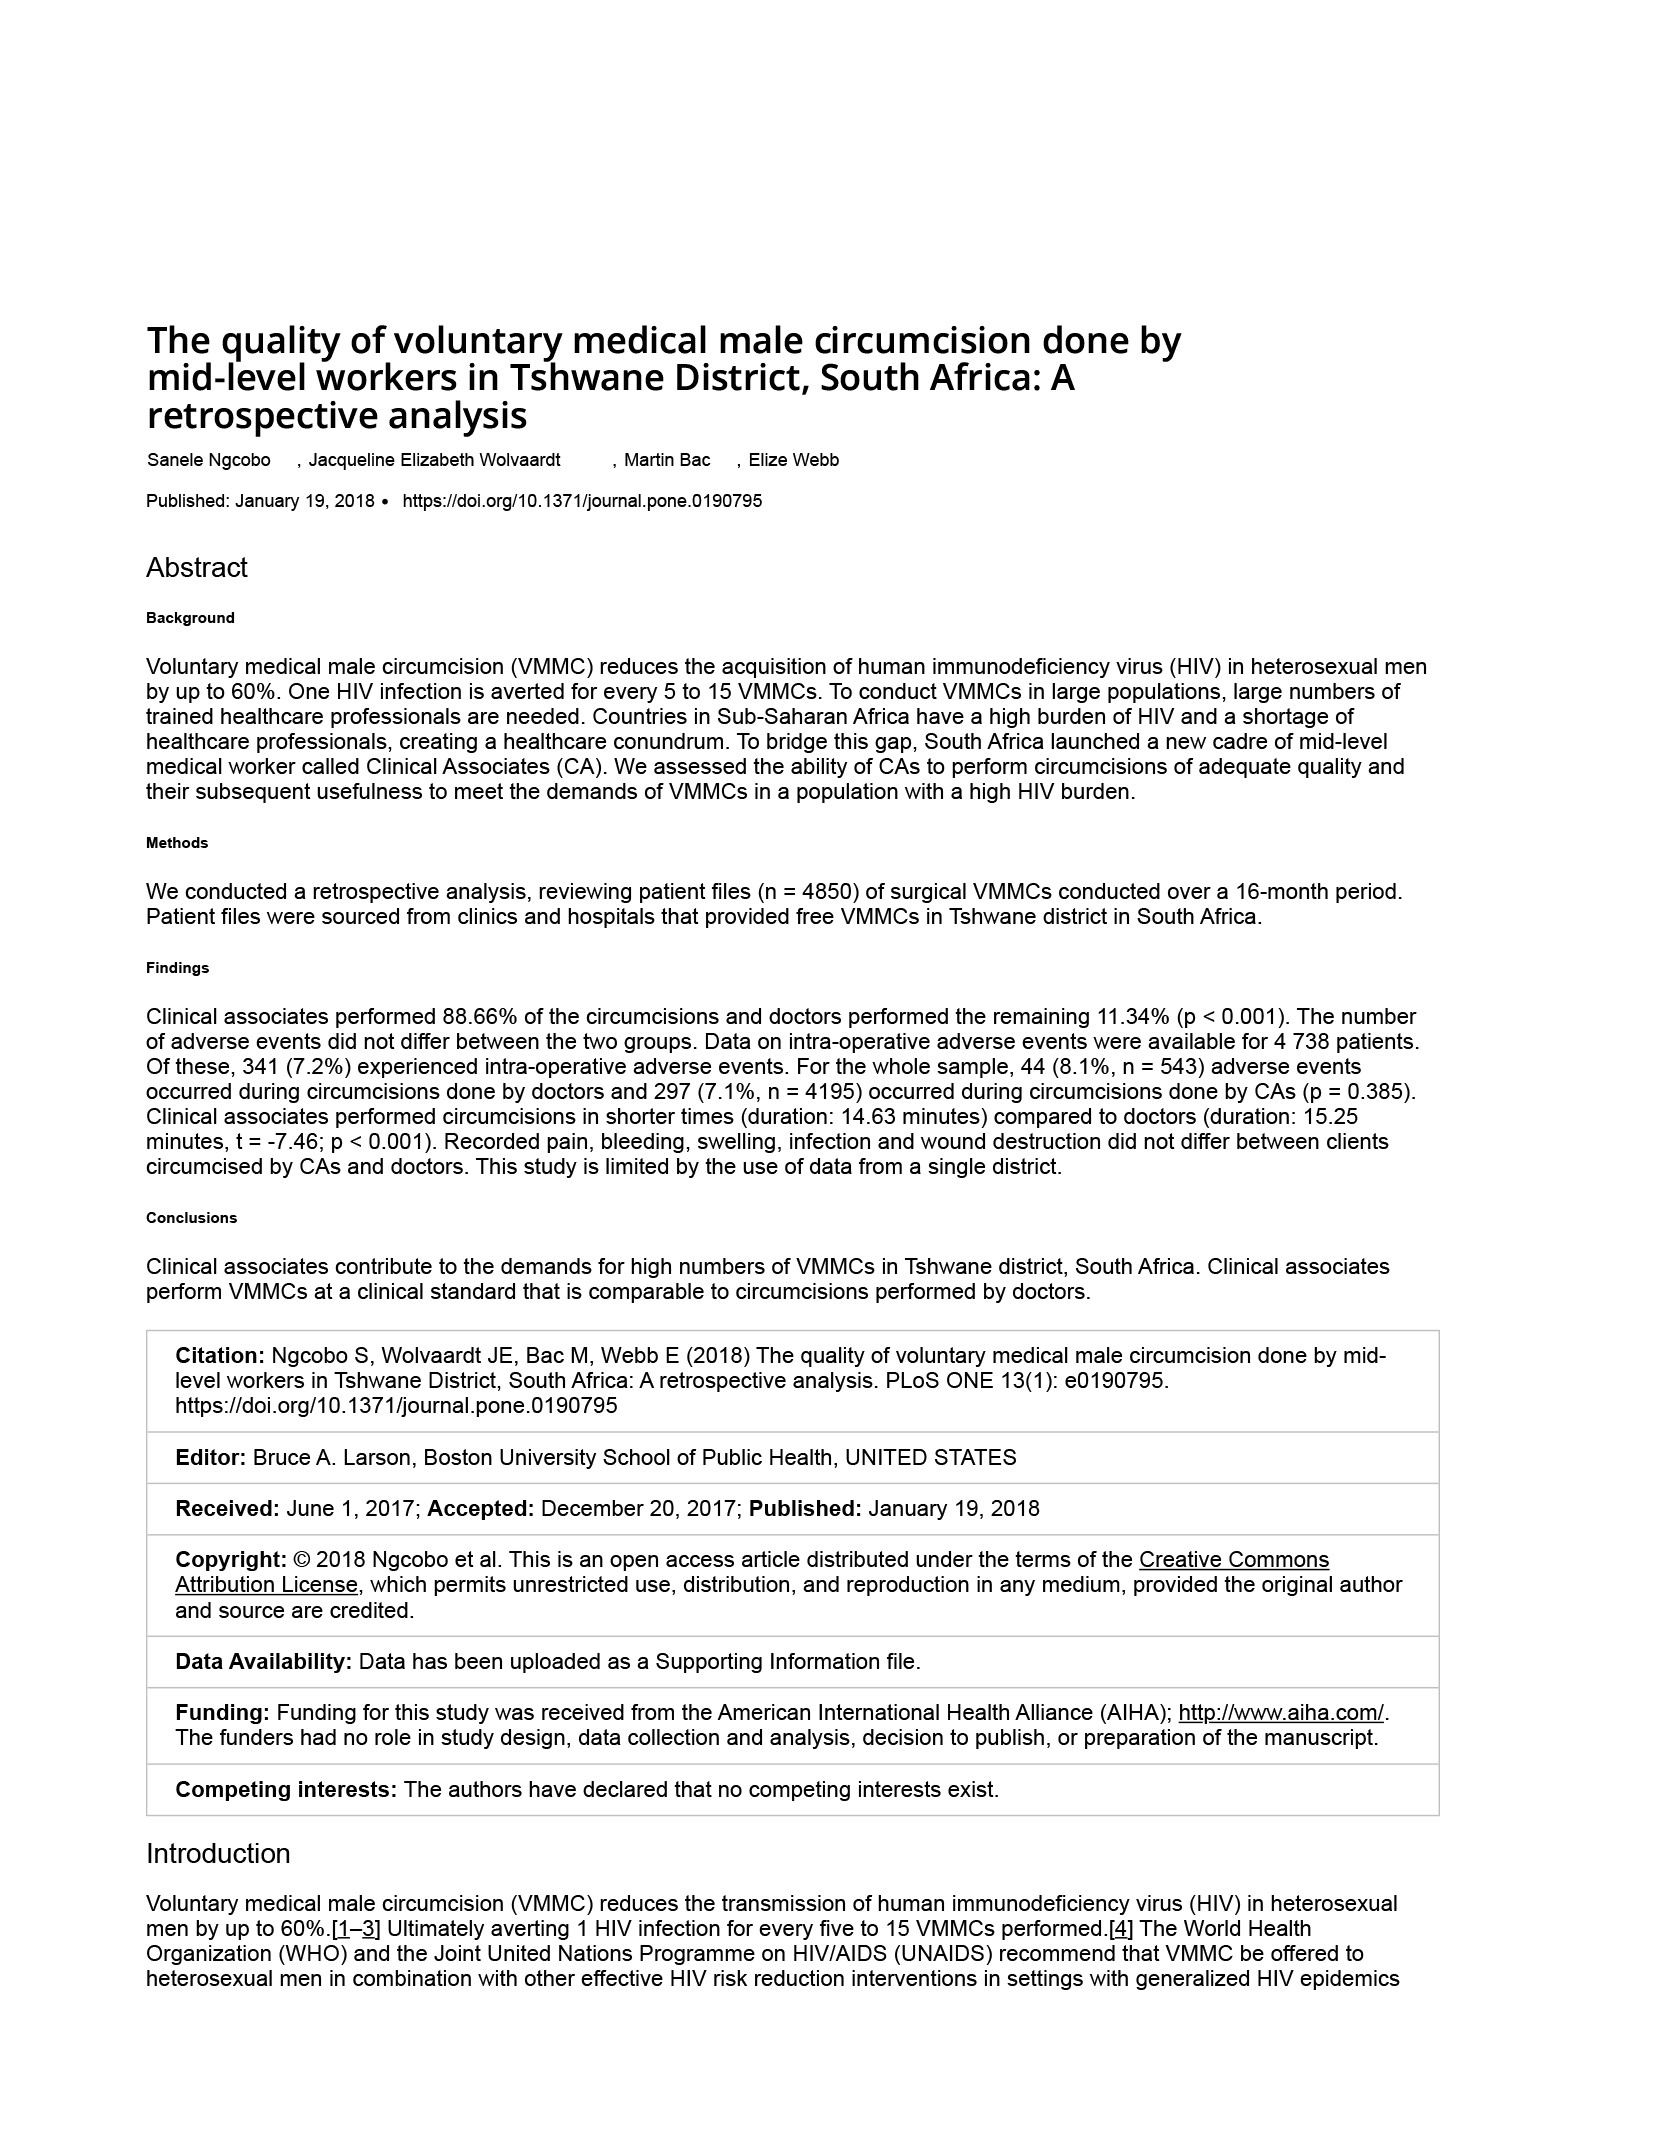 The Quality of Voluntary Medical Male Circumcision Done by Mid-Level Workers in Tshwane District, South Africa: A Retrospective Analysis - cover